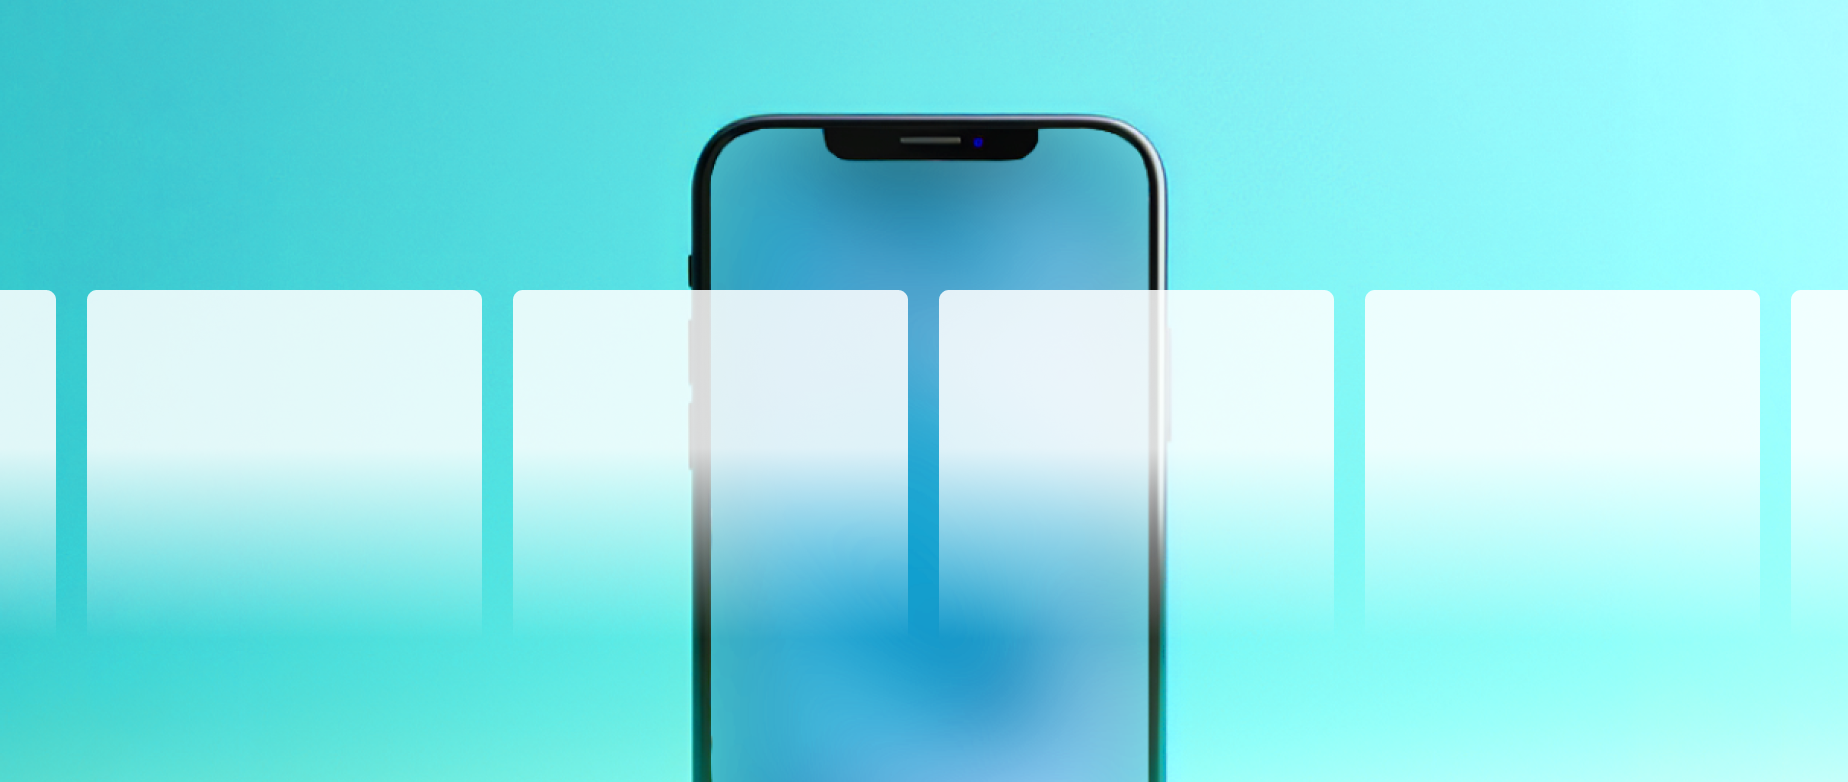 A line of translucent blocks before an iPhone represents a dynamic ad carousel.